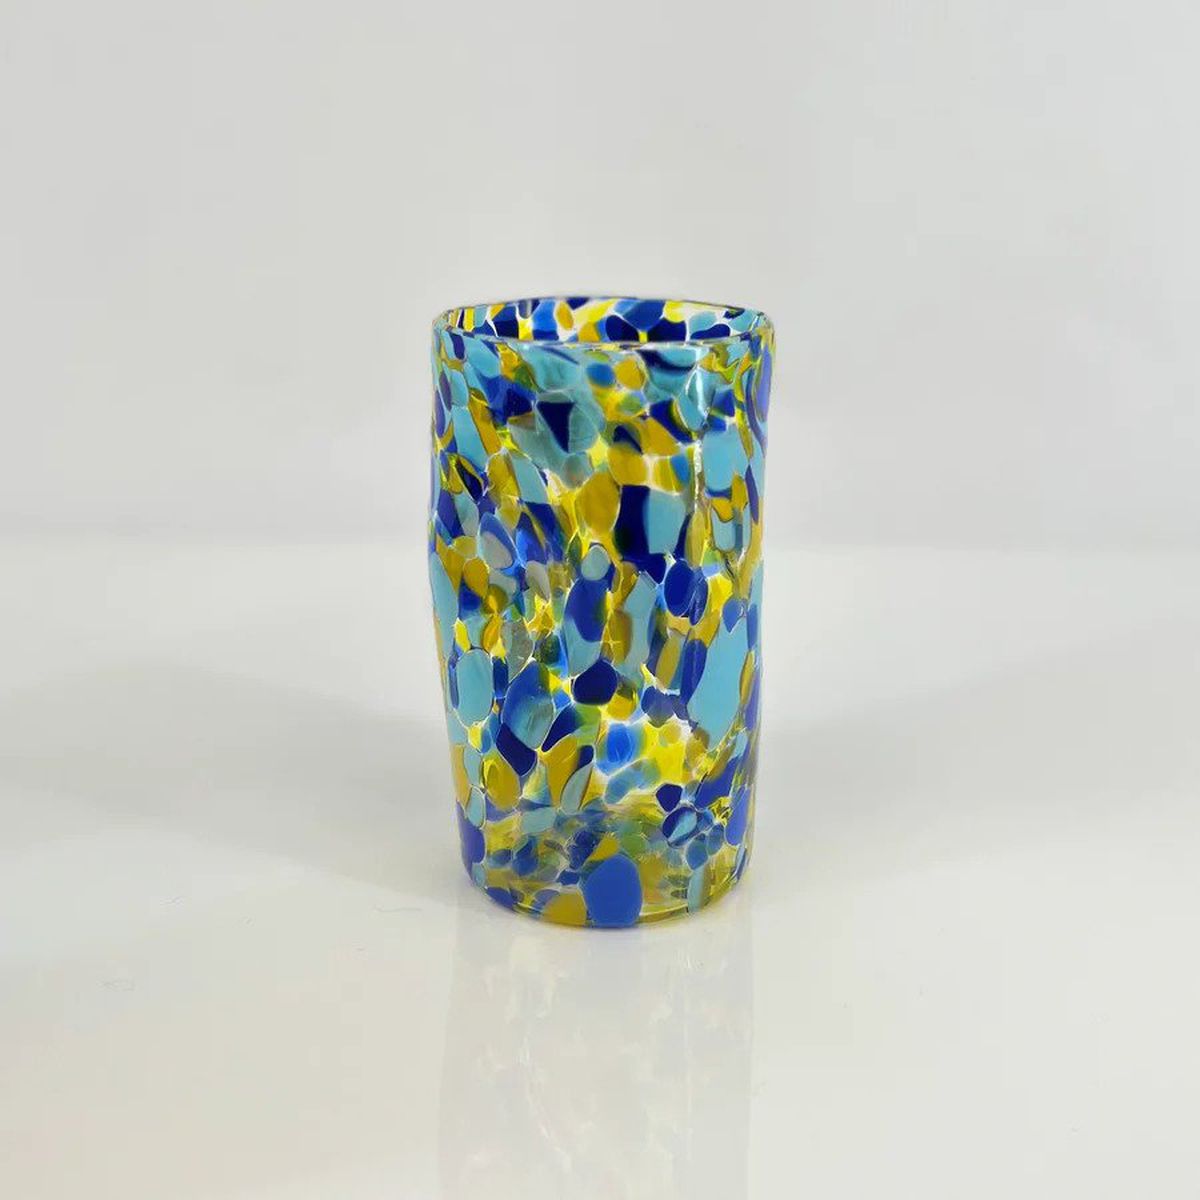 A blue and yellow piece of murano glassware